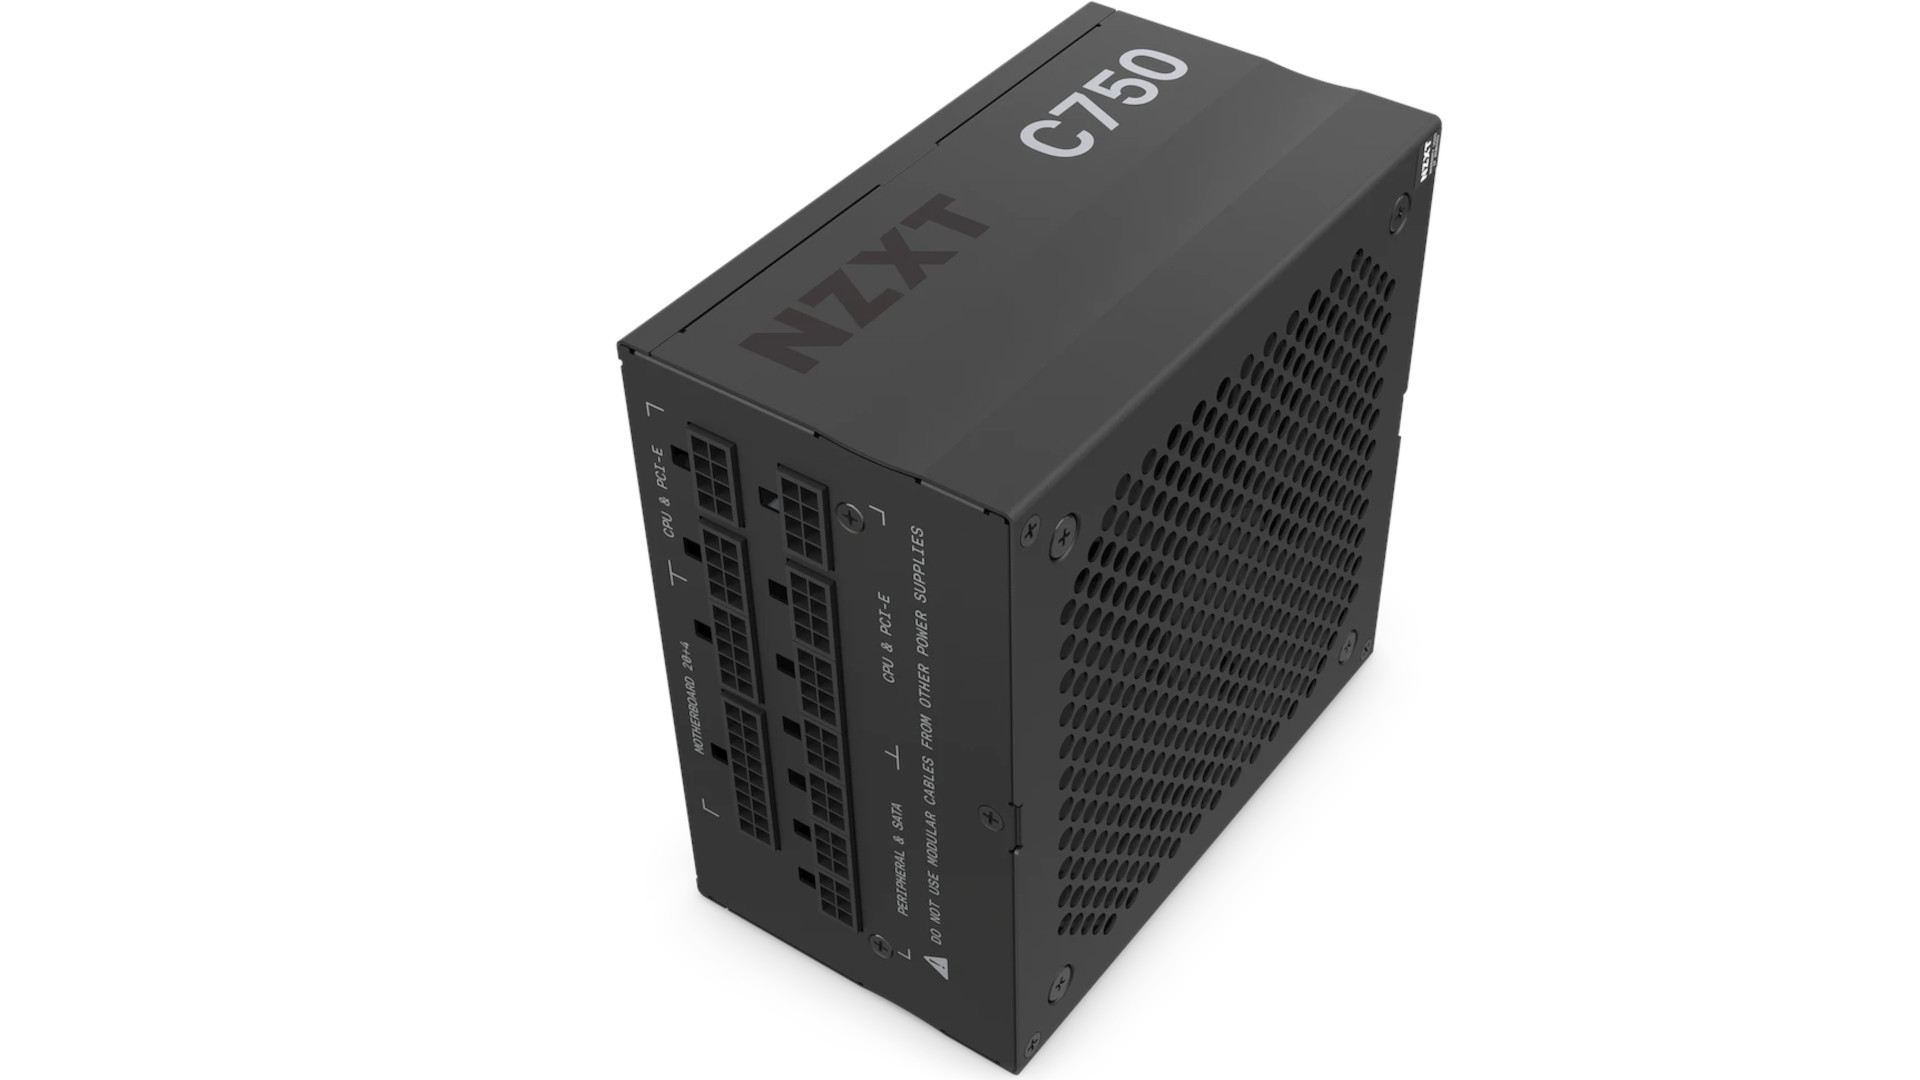 You are currently viewing NZXT C750 Gold Power Supply Review